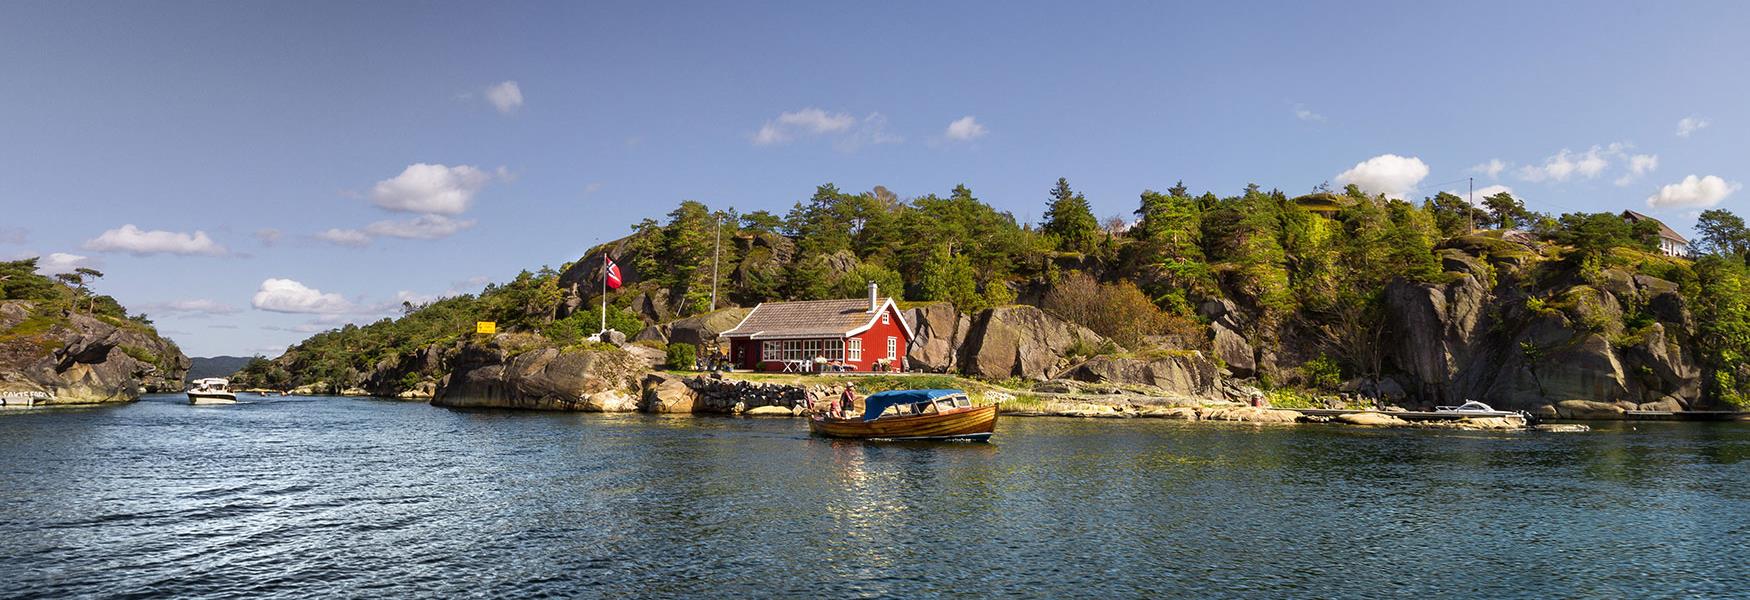 leisure boat sailing in the archipelago off the coast of Bamble